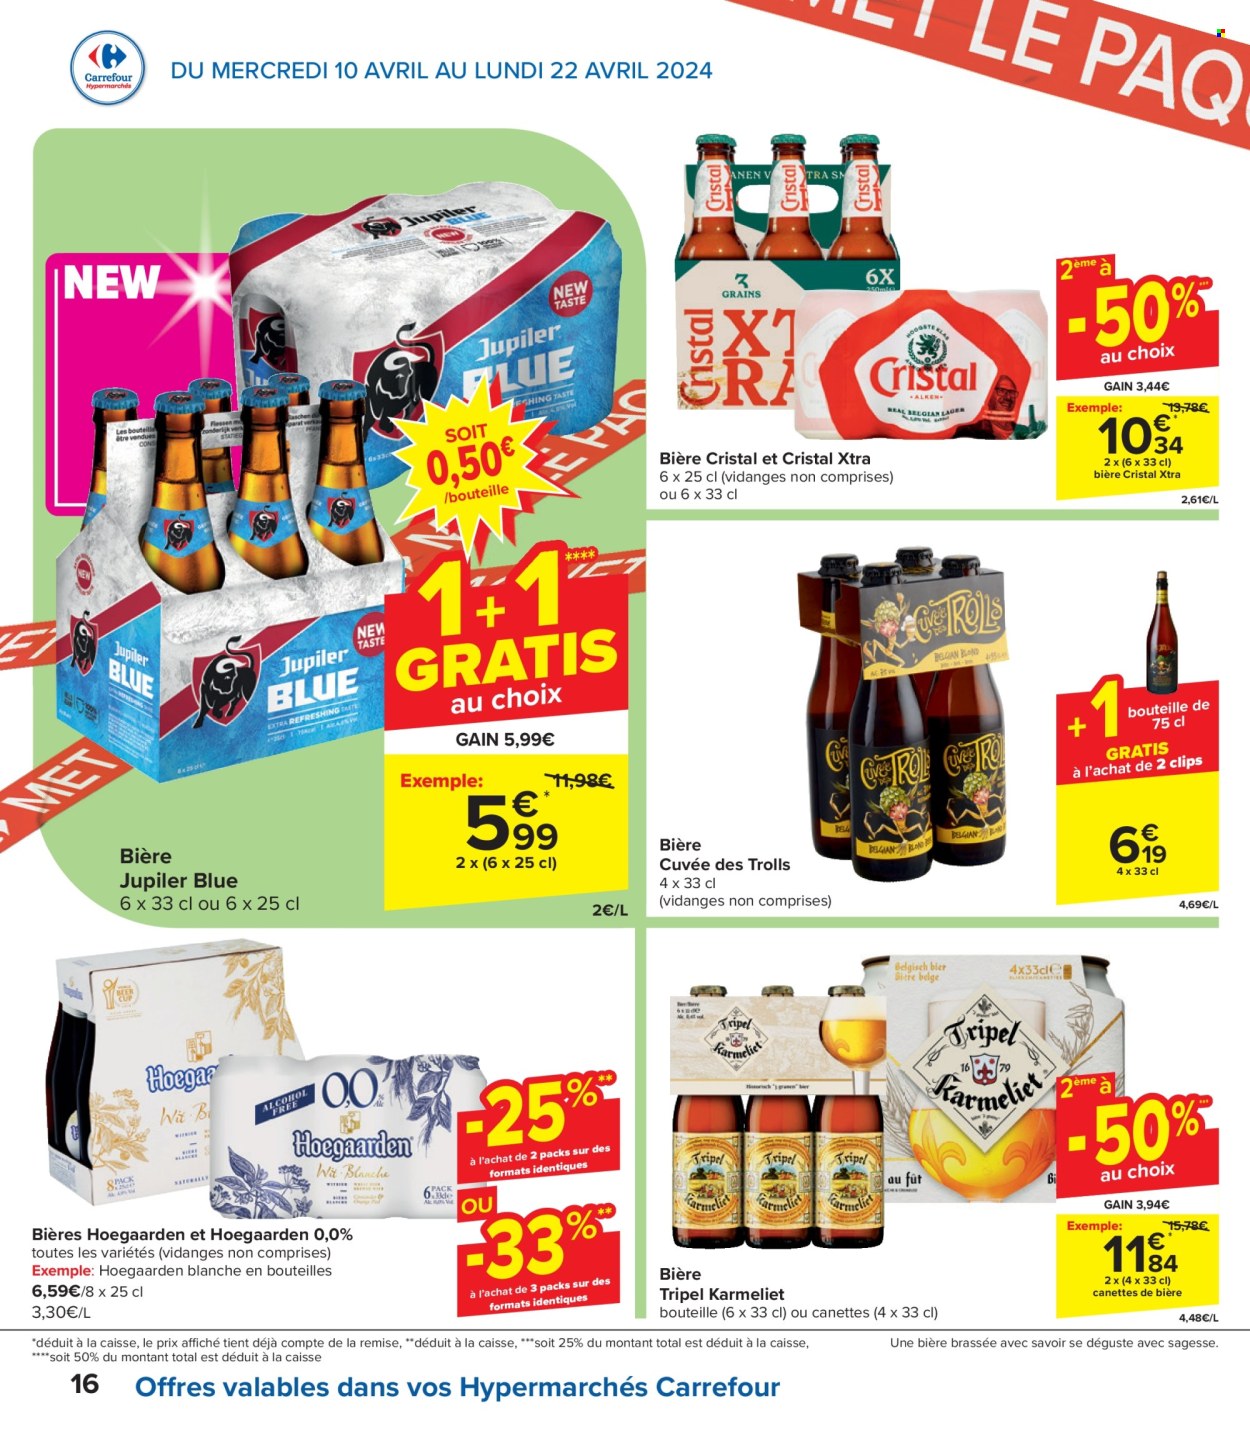 Catalogue Carrefour hypermarkt - 10.4.2024 - 22.4.2024. Page 16.